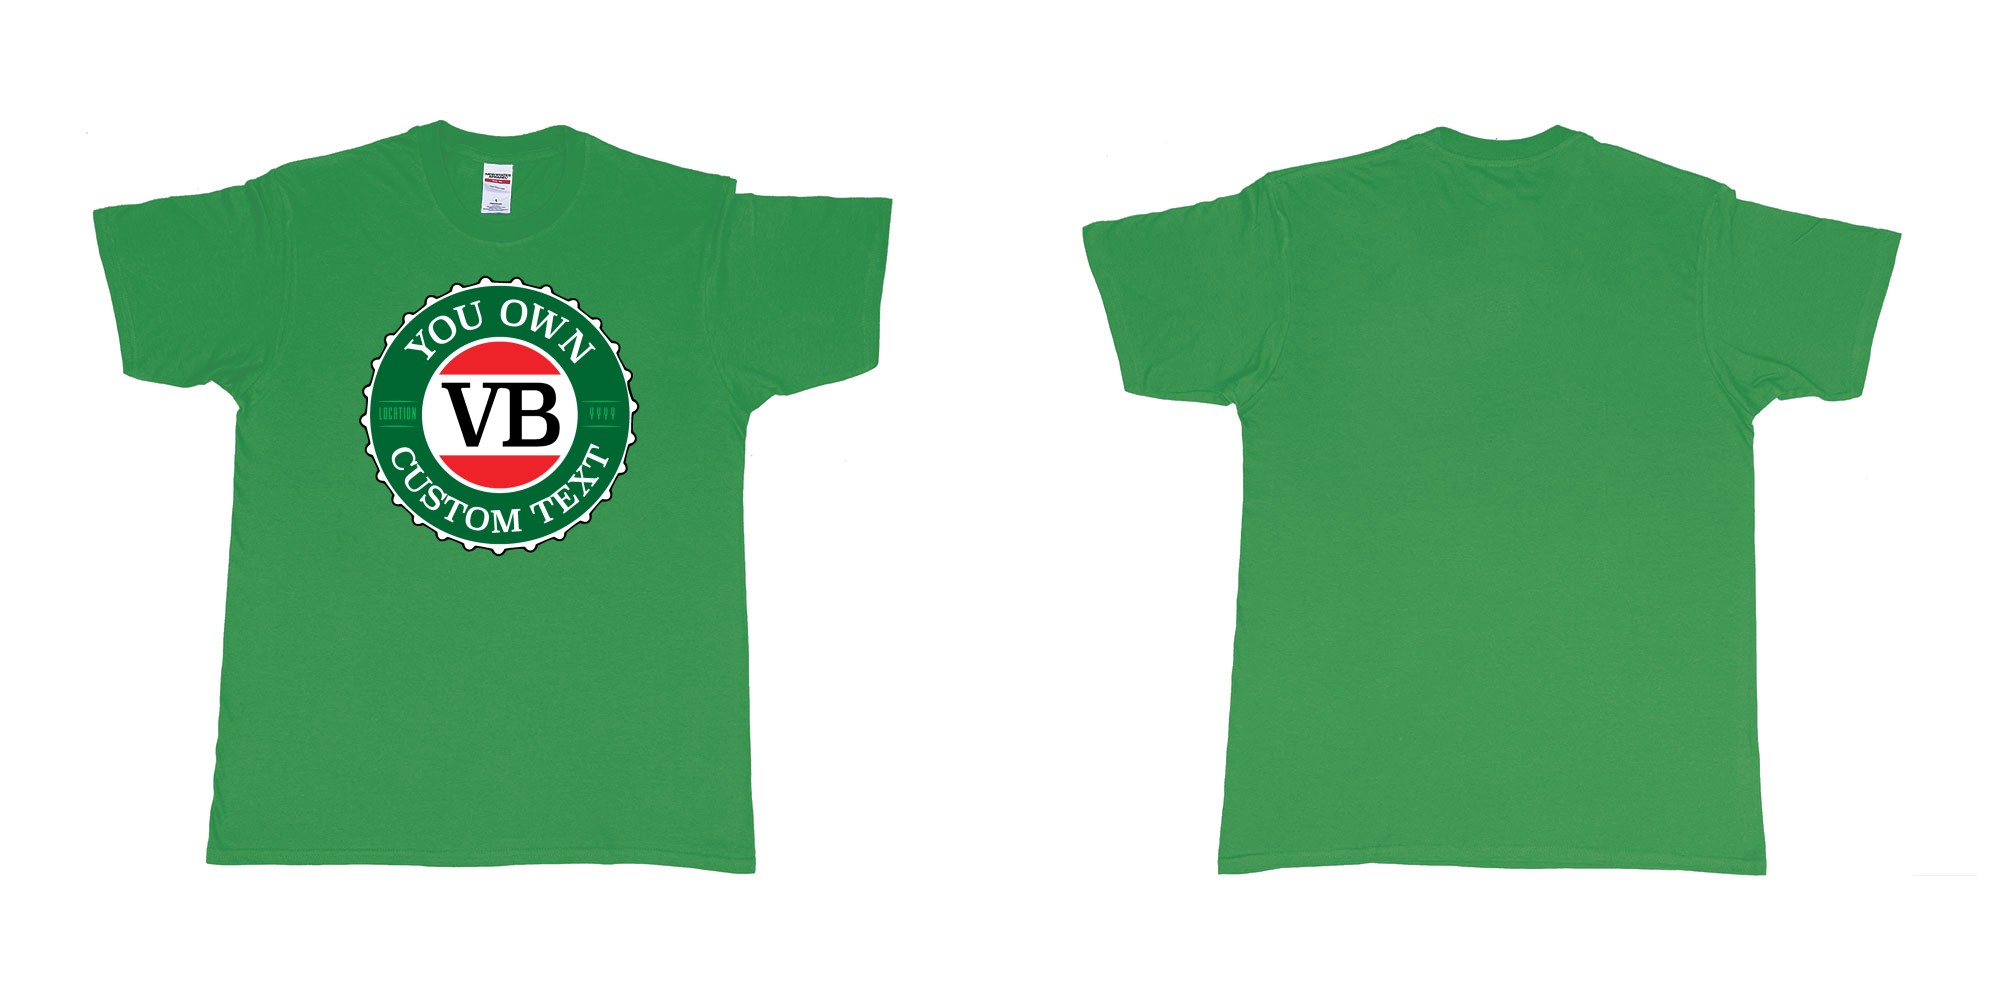 Custom tshirt design vb victoria bitter beer brand bottlecap in fabric color irish-green choice your own text made in Bali by The Pirate Way